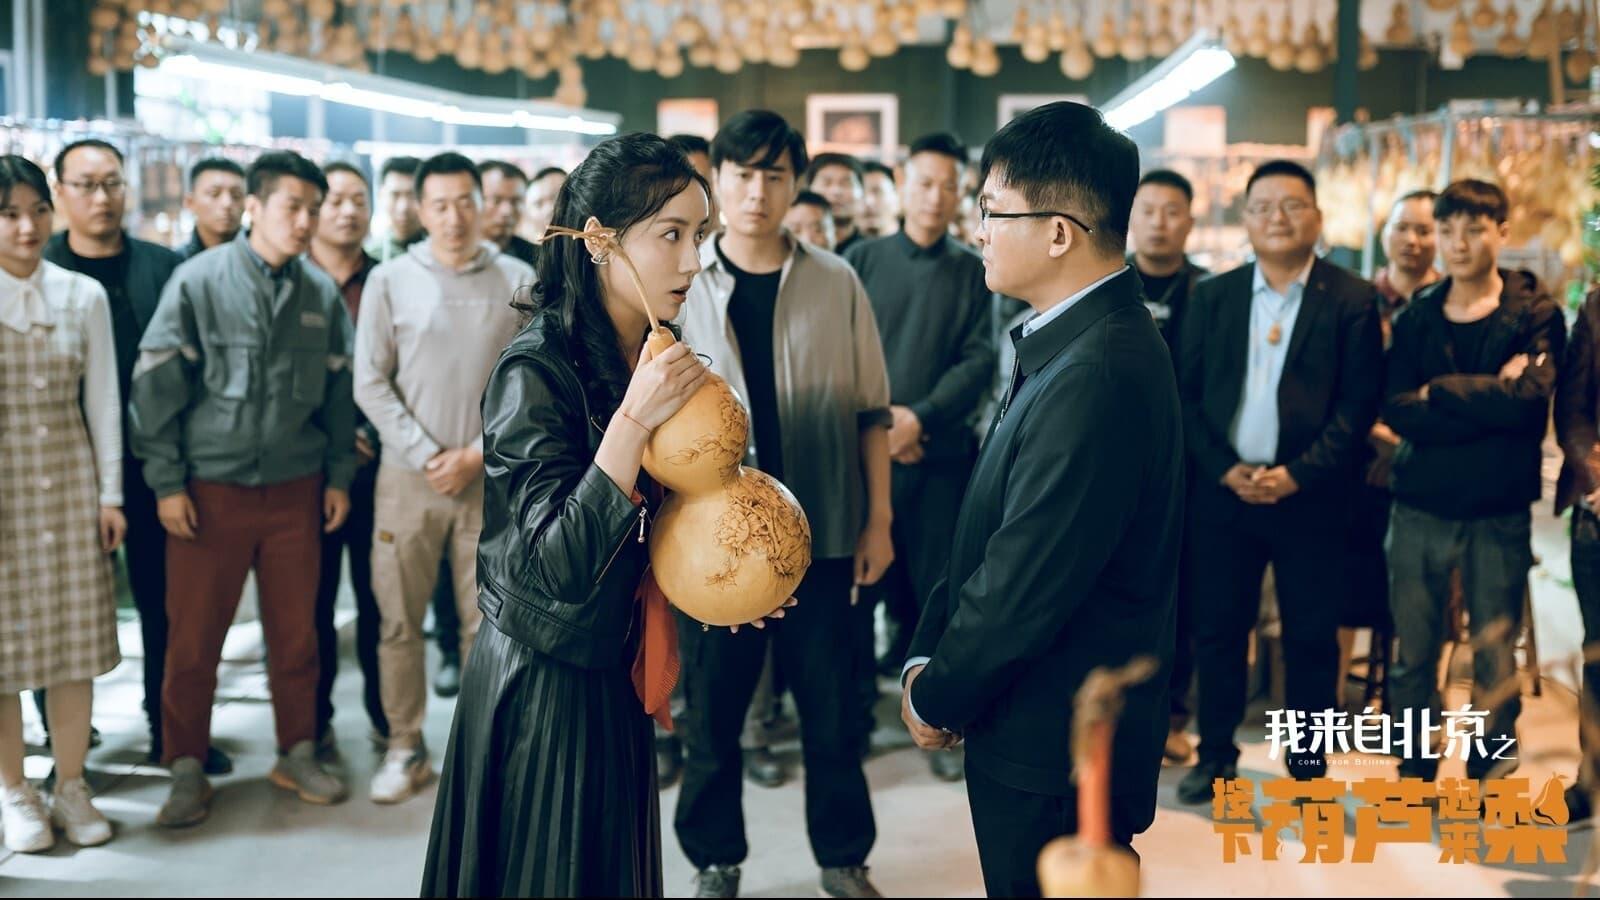 I'm from Beijing - Press the gourd to get a pear backdrop